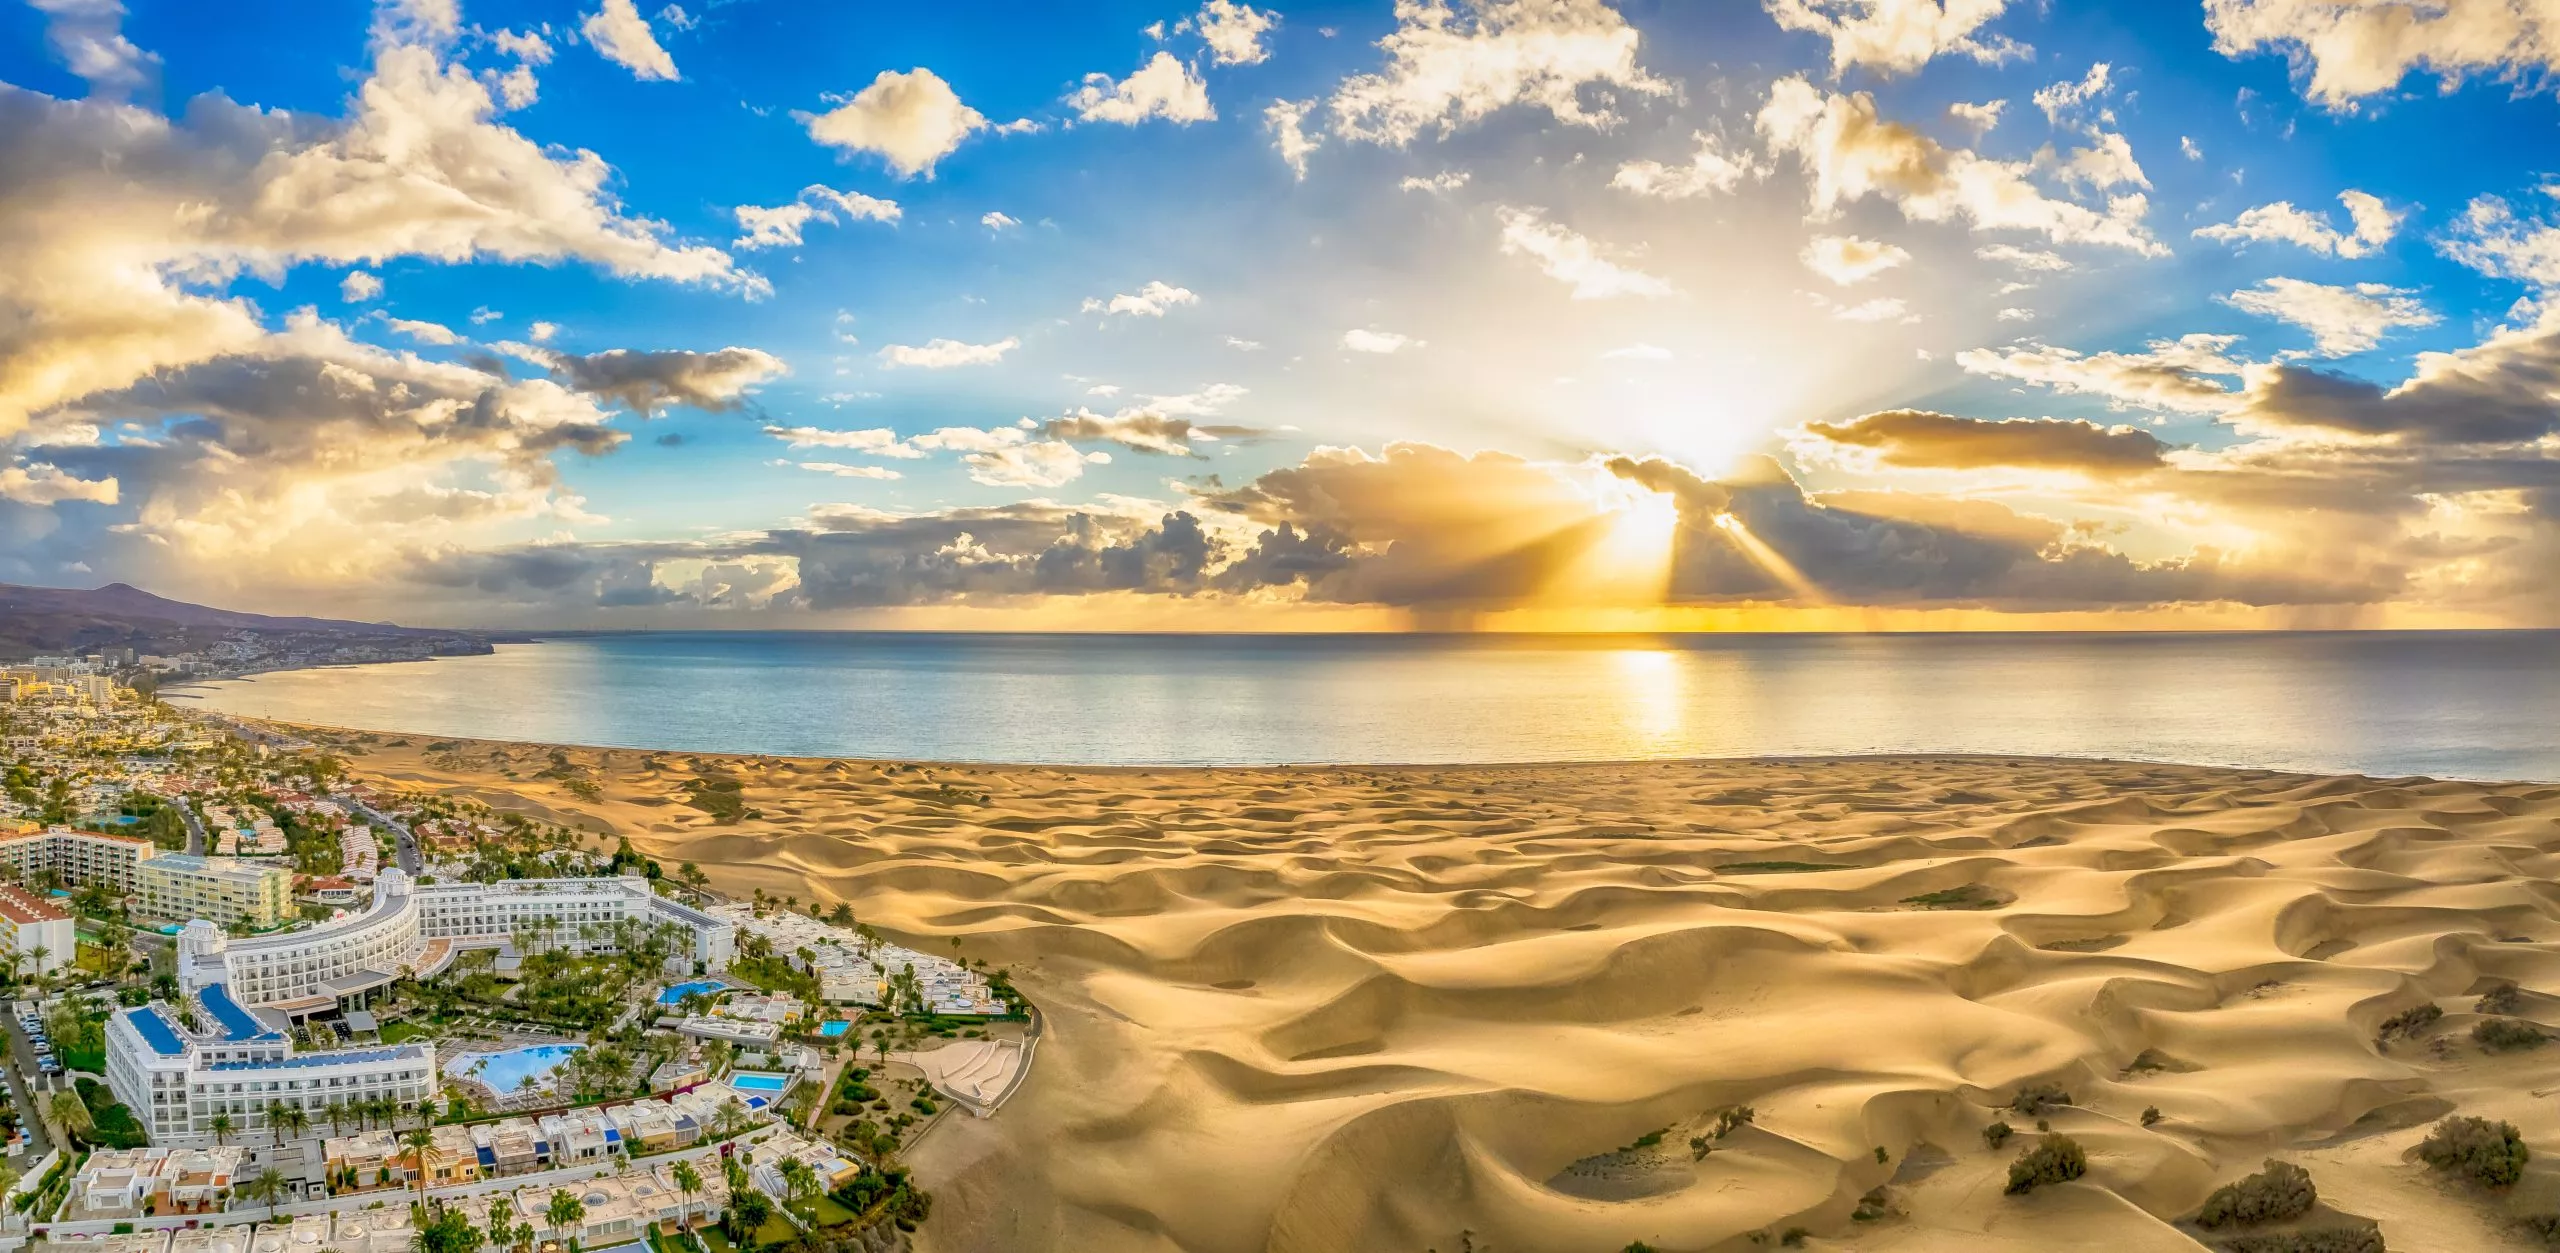 Landscape with Maspalomas town and golden sand dunes at sunrise, Gran Canaria, Canary Islands, Spain